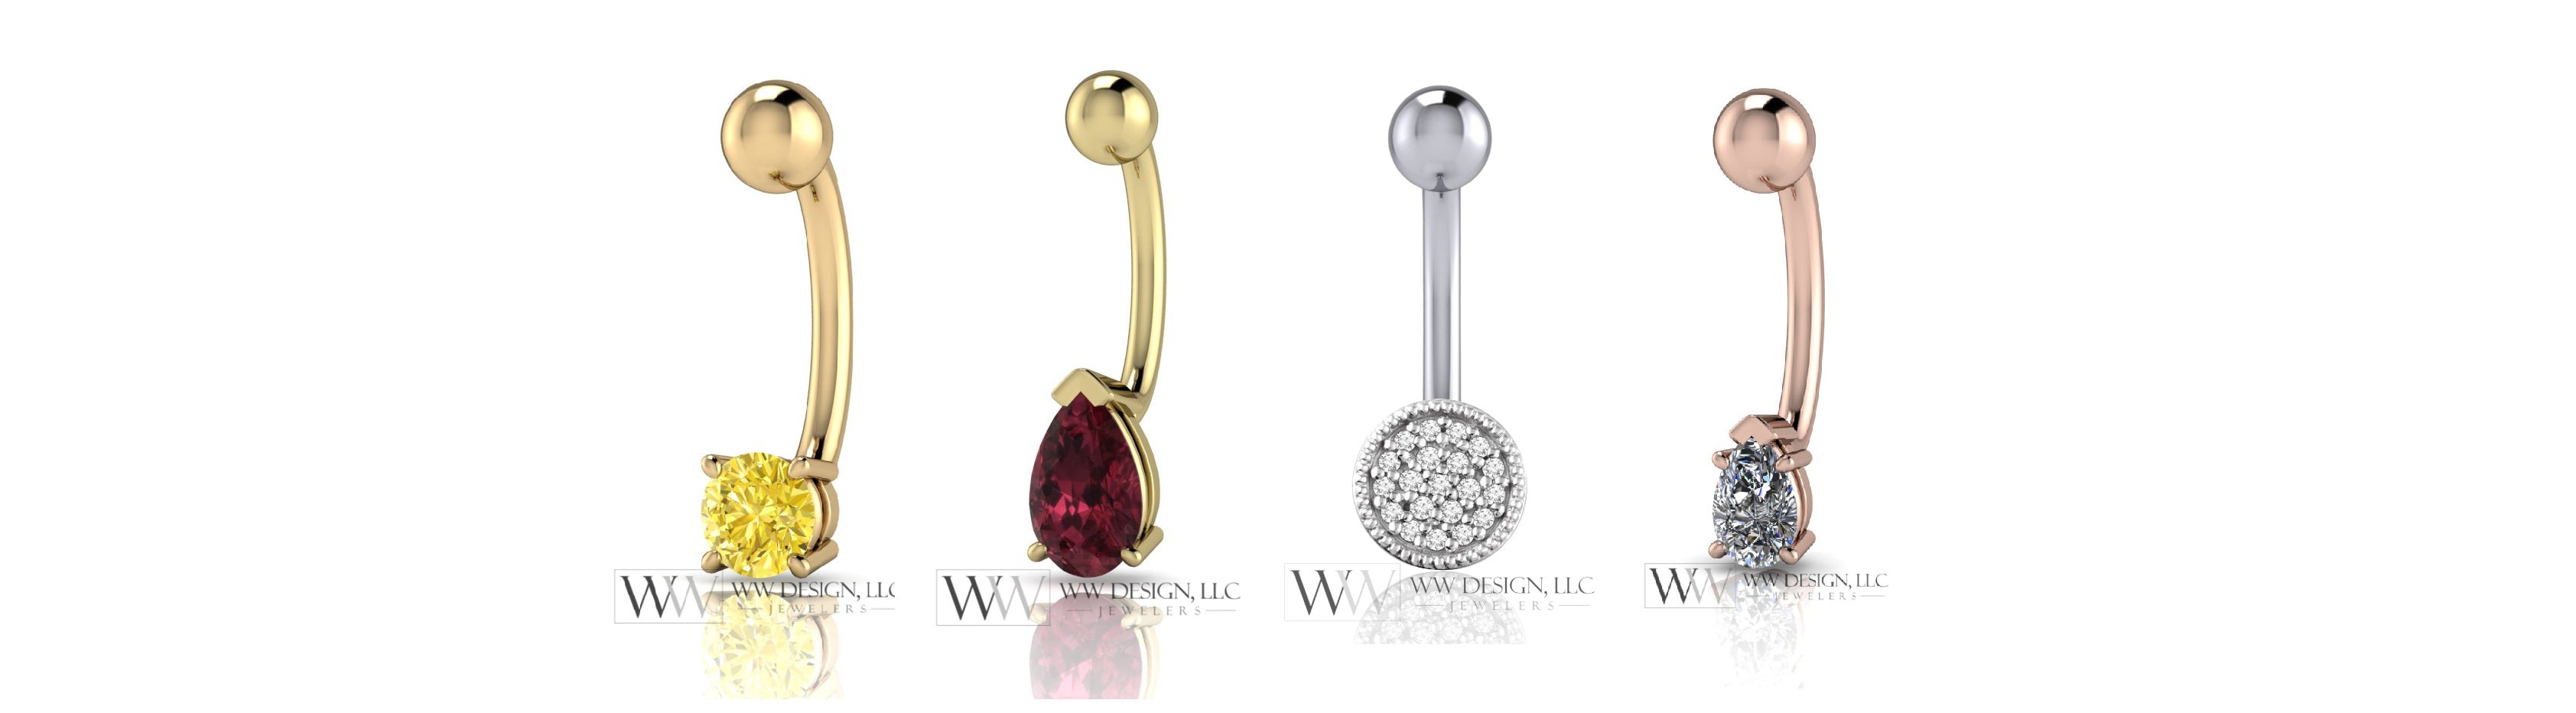 What Makes our Curved Belly Rings Unique?